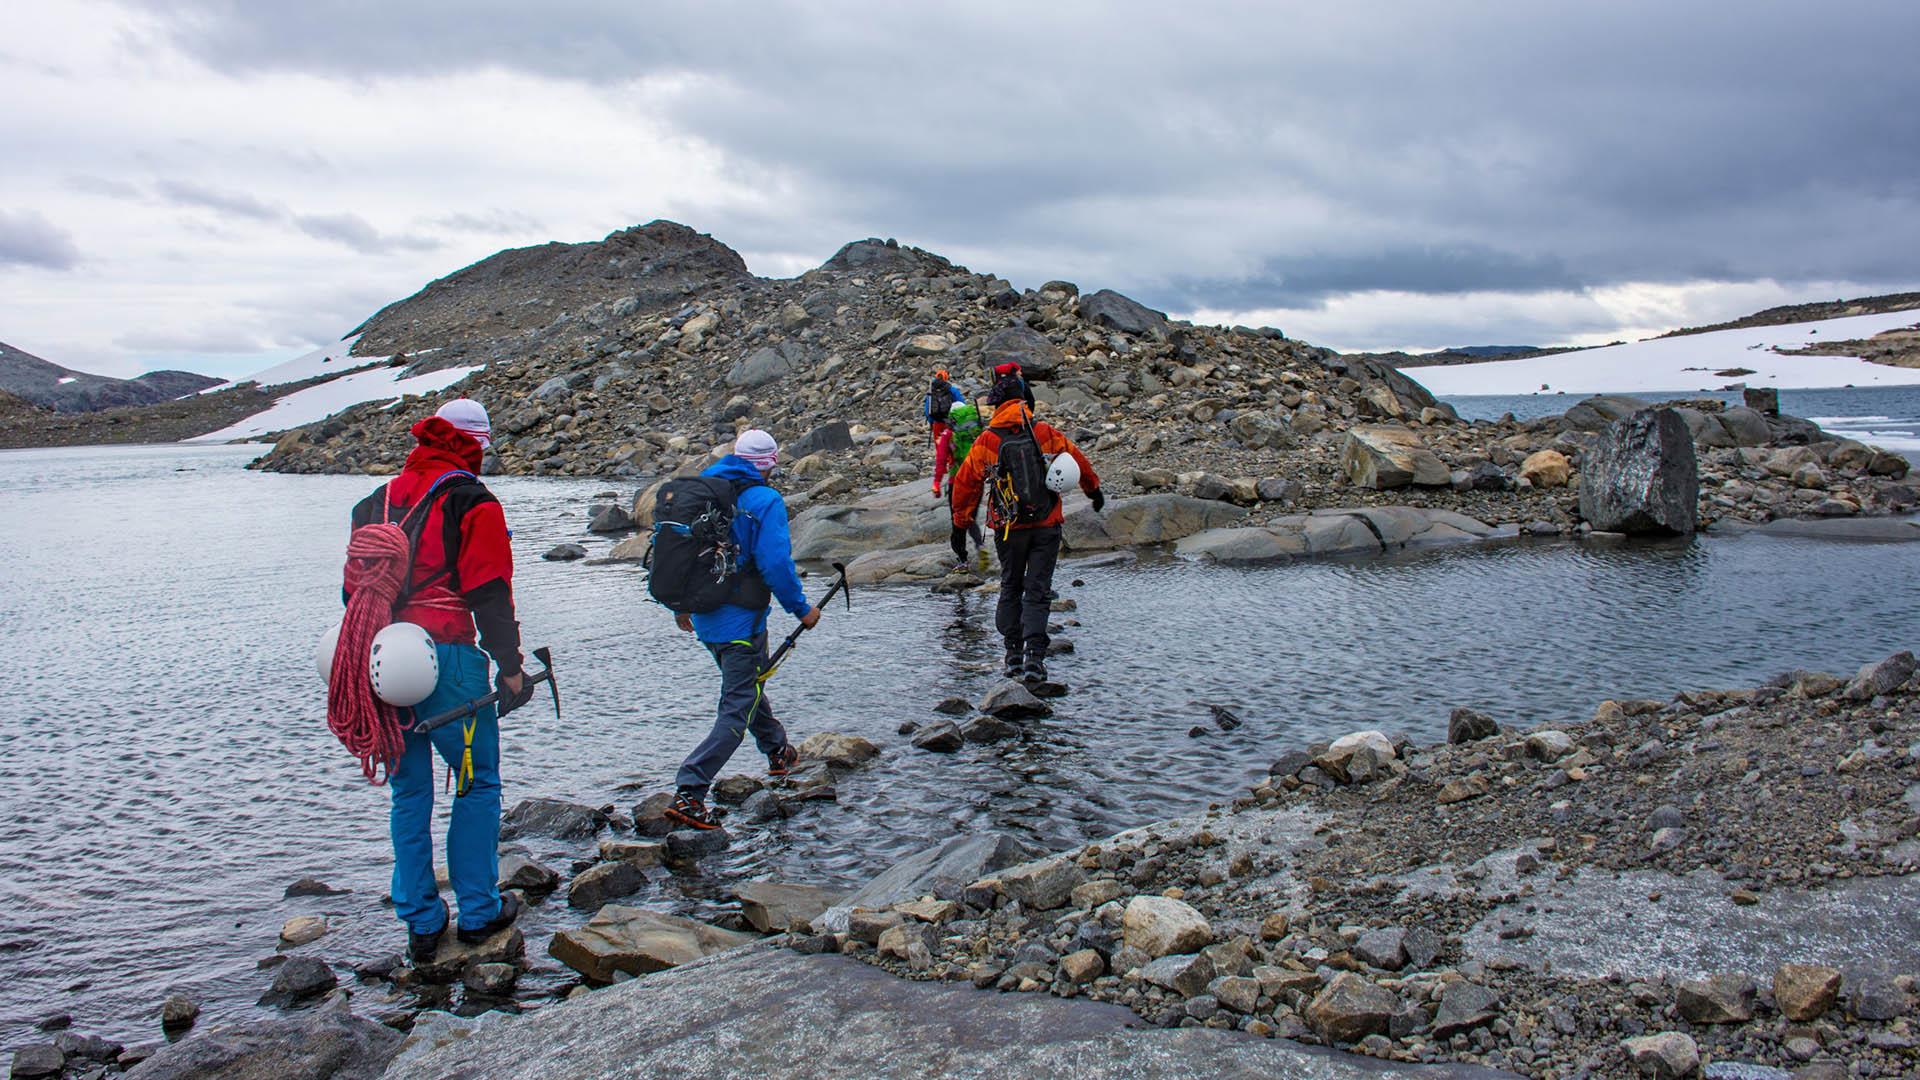 Mountaineers with backpacks, helmets and ice axes cross a river on rocks in a barren high mountain landscape.